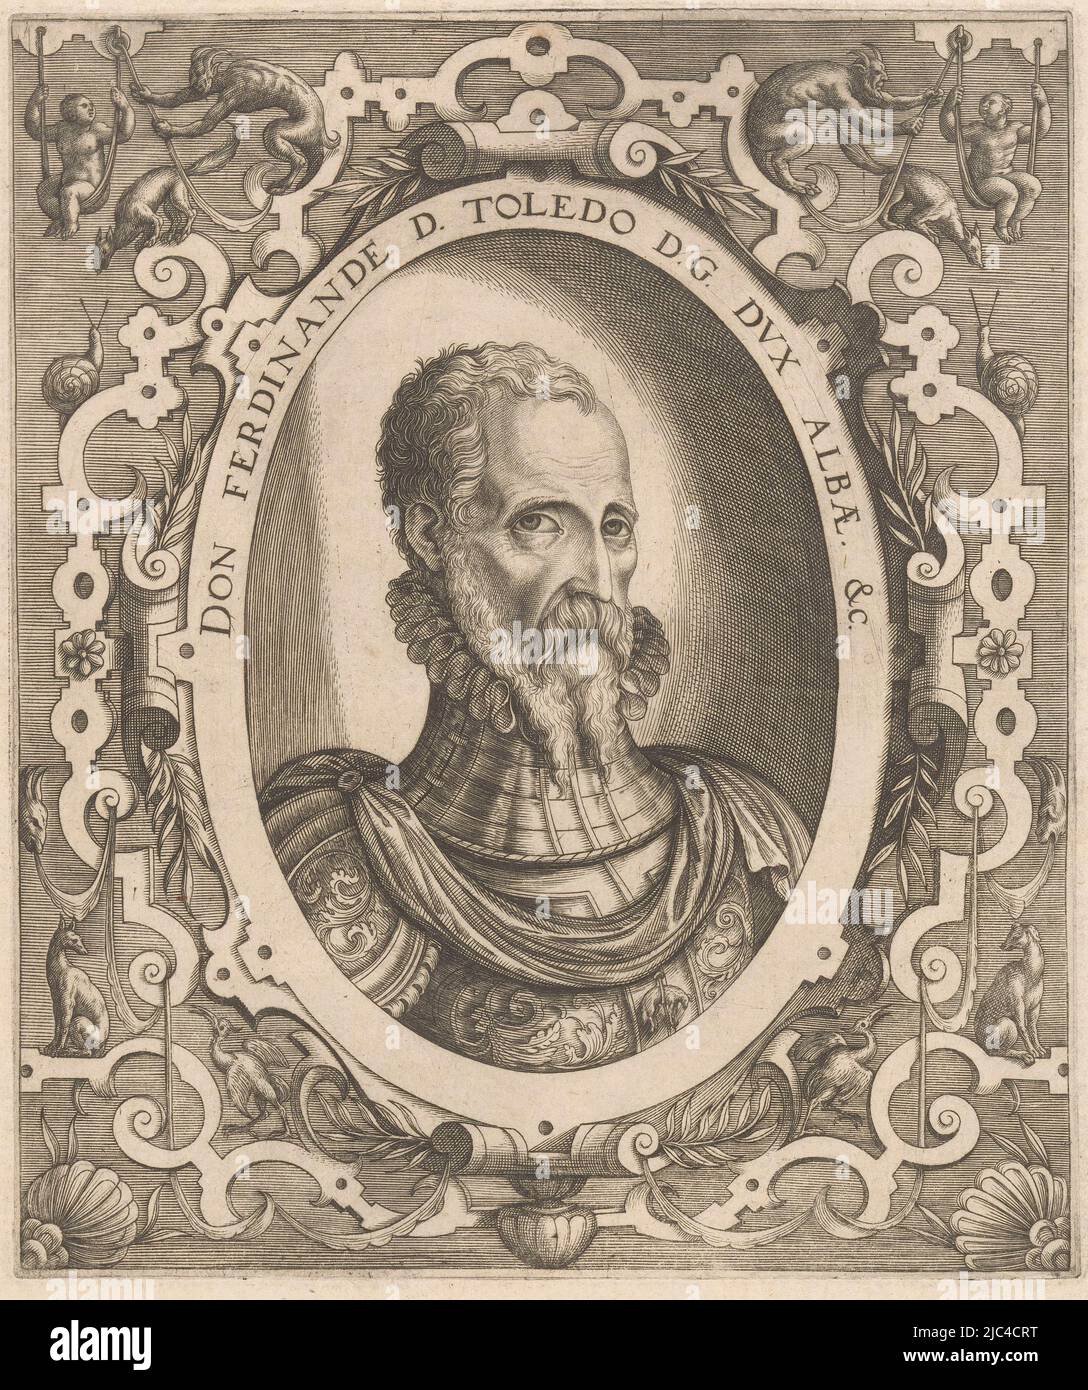 A portrait of Fernando Ãlvarez de Toledo, in armor with the chain of the Order of the Golden Fleece, framed in an oval surrounded by Mannerist decorative motifs with animals and satyrs, Portrait of Fernando Ãlvarez de Toledo, Duke of Alva Don Ferdinande D. Toledo D.G. Dux Albæ. &c.  Portraits of sovereigns and other illustrious figures (series title) Imagines Quorundam Principum et Illustrium Virorum (series title), print maker: Niccolò Nelli, Venice, 1569, paper, engraving, etching, h 205 mm - w 172 mm Stock Photo